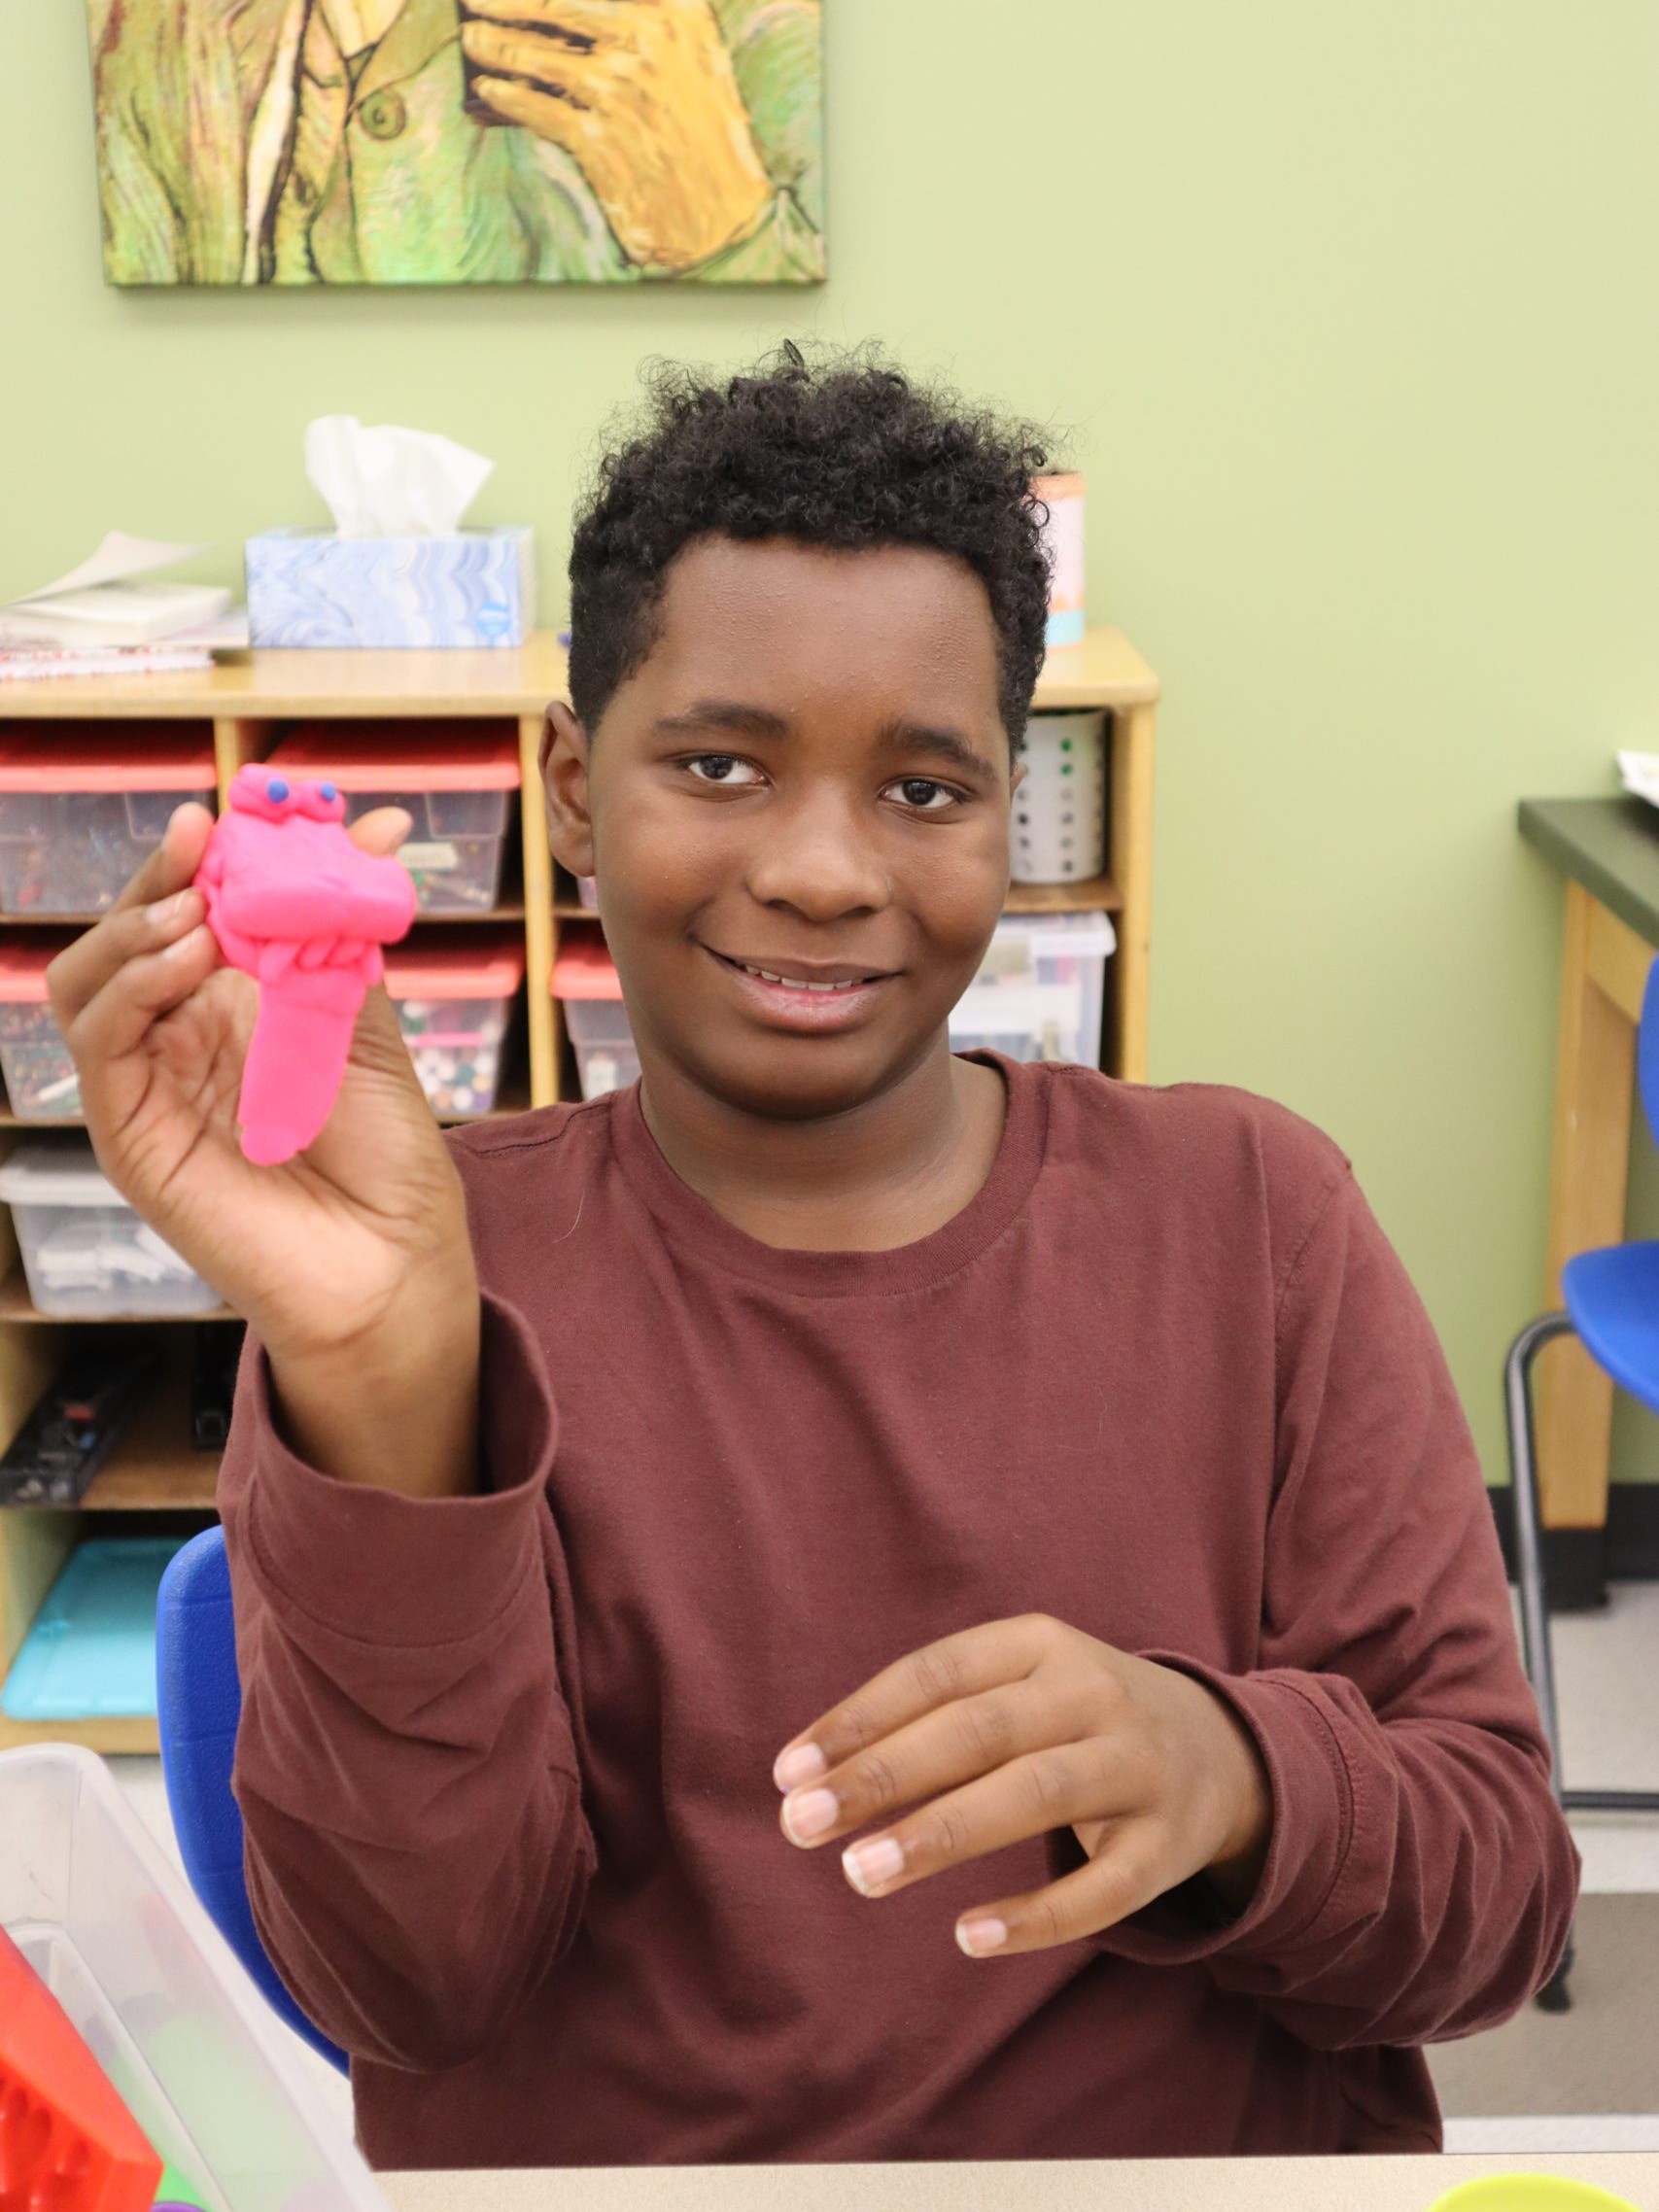 Student holding alligator mascot created out of playdoh